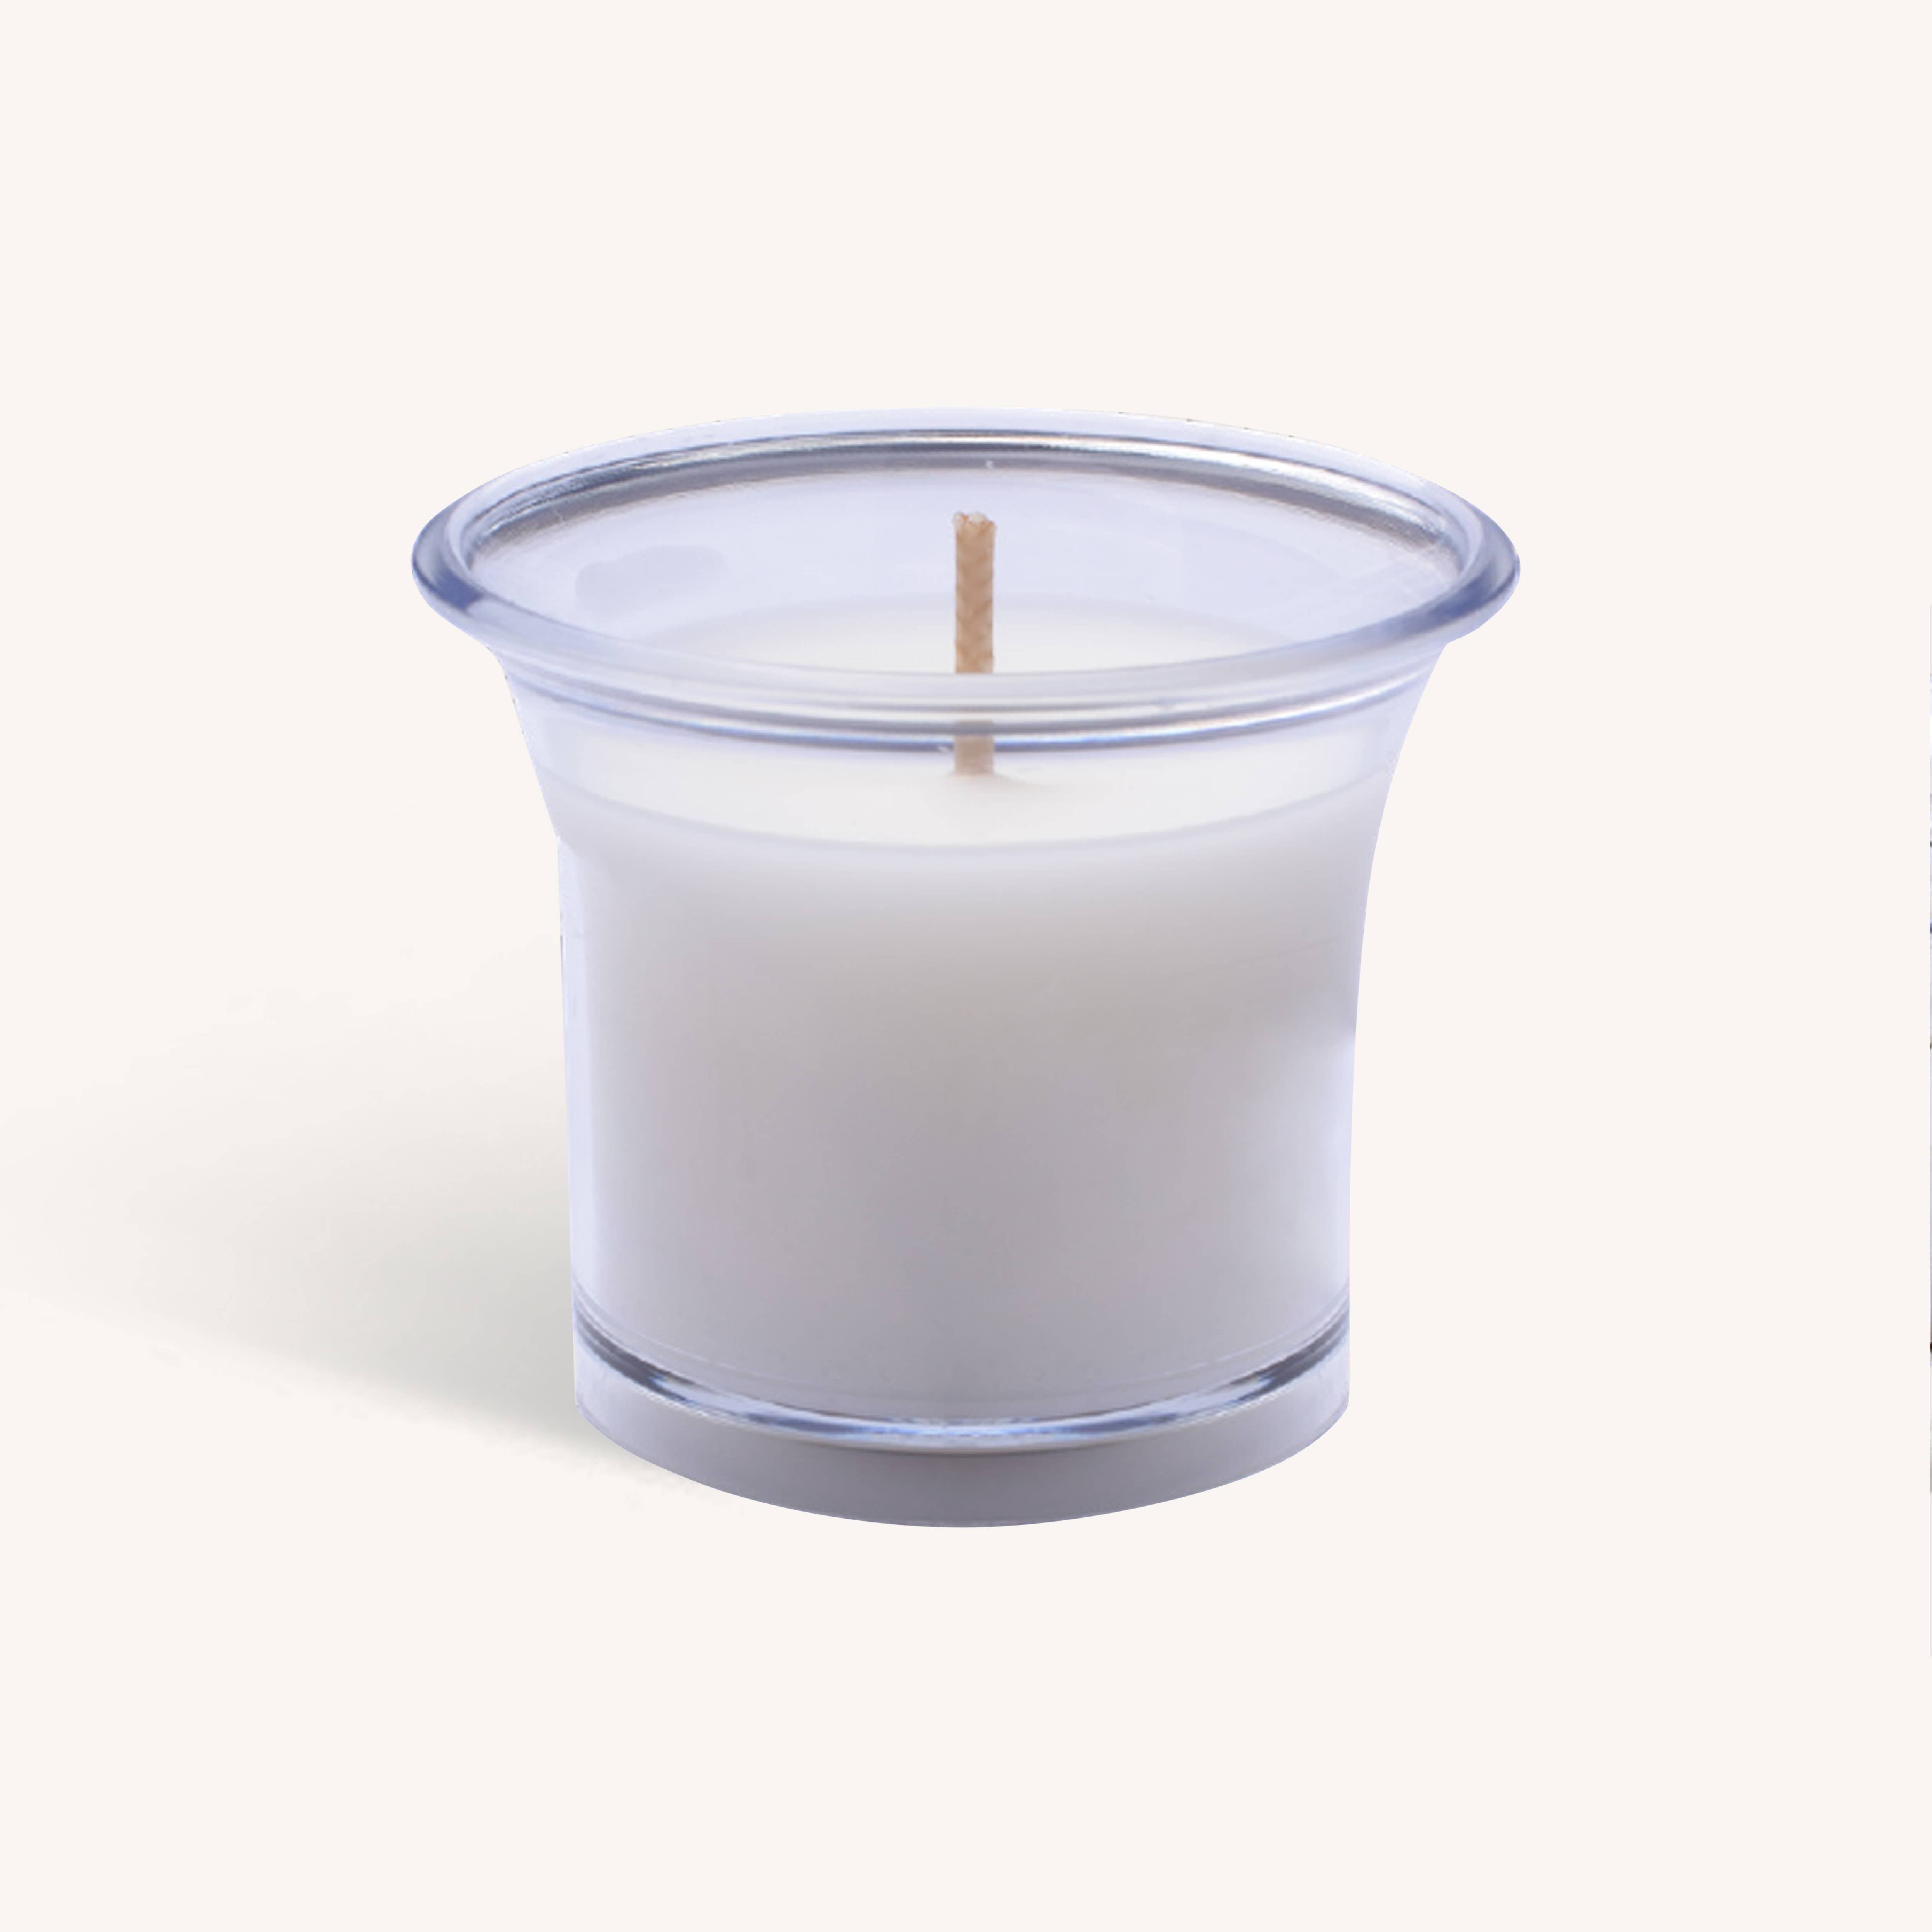 Scented Candles In Plastic Cups - Lily - 12 Hour - 4 Pack